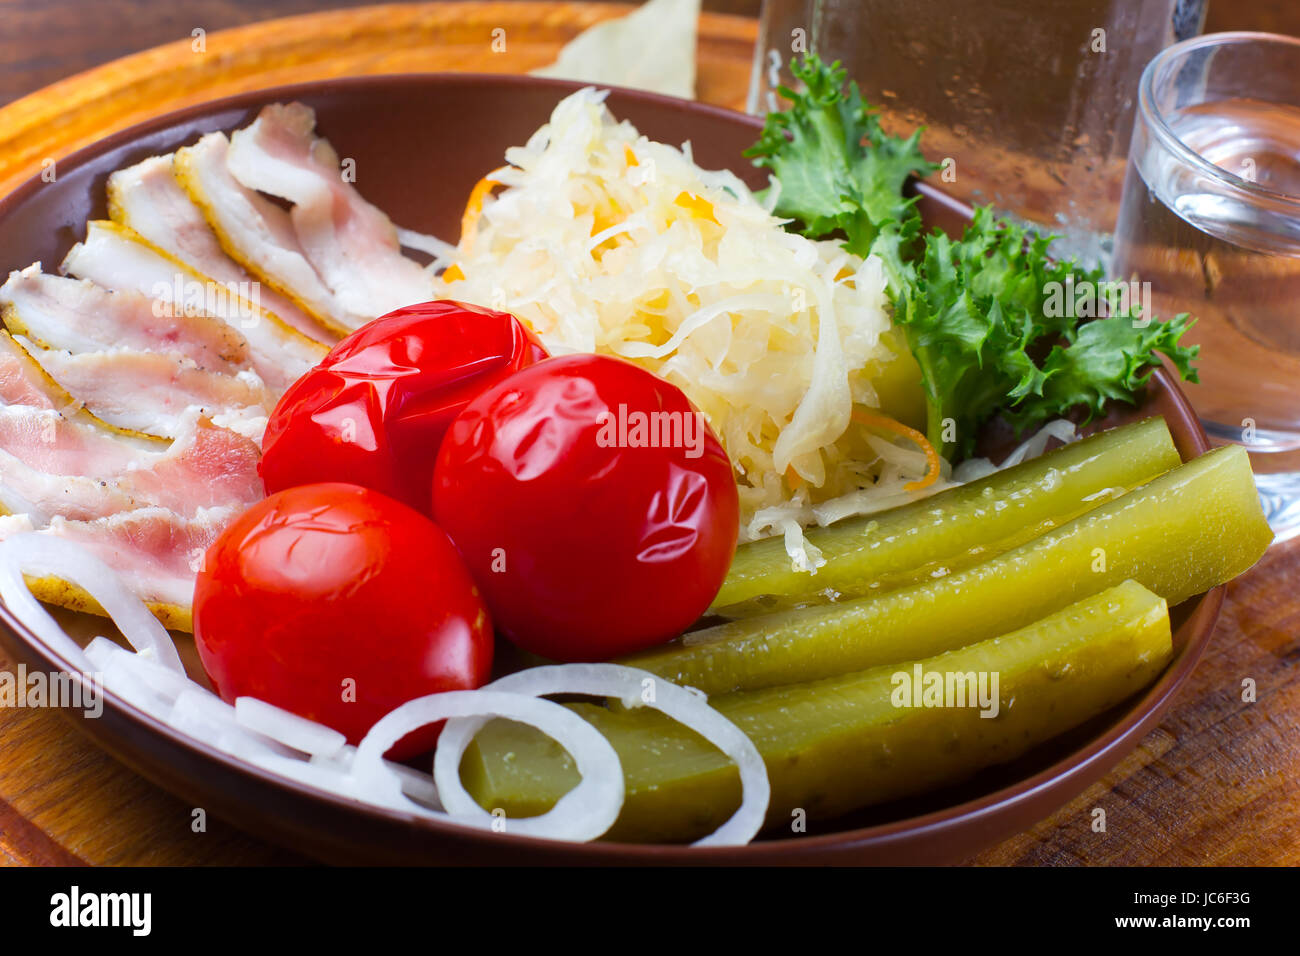 Assorted pickles and pickled vegetables with bacon slices, served on a wooden plate. Stock Photo